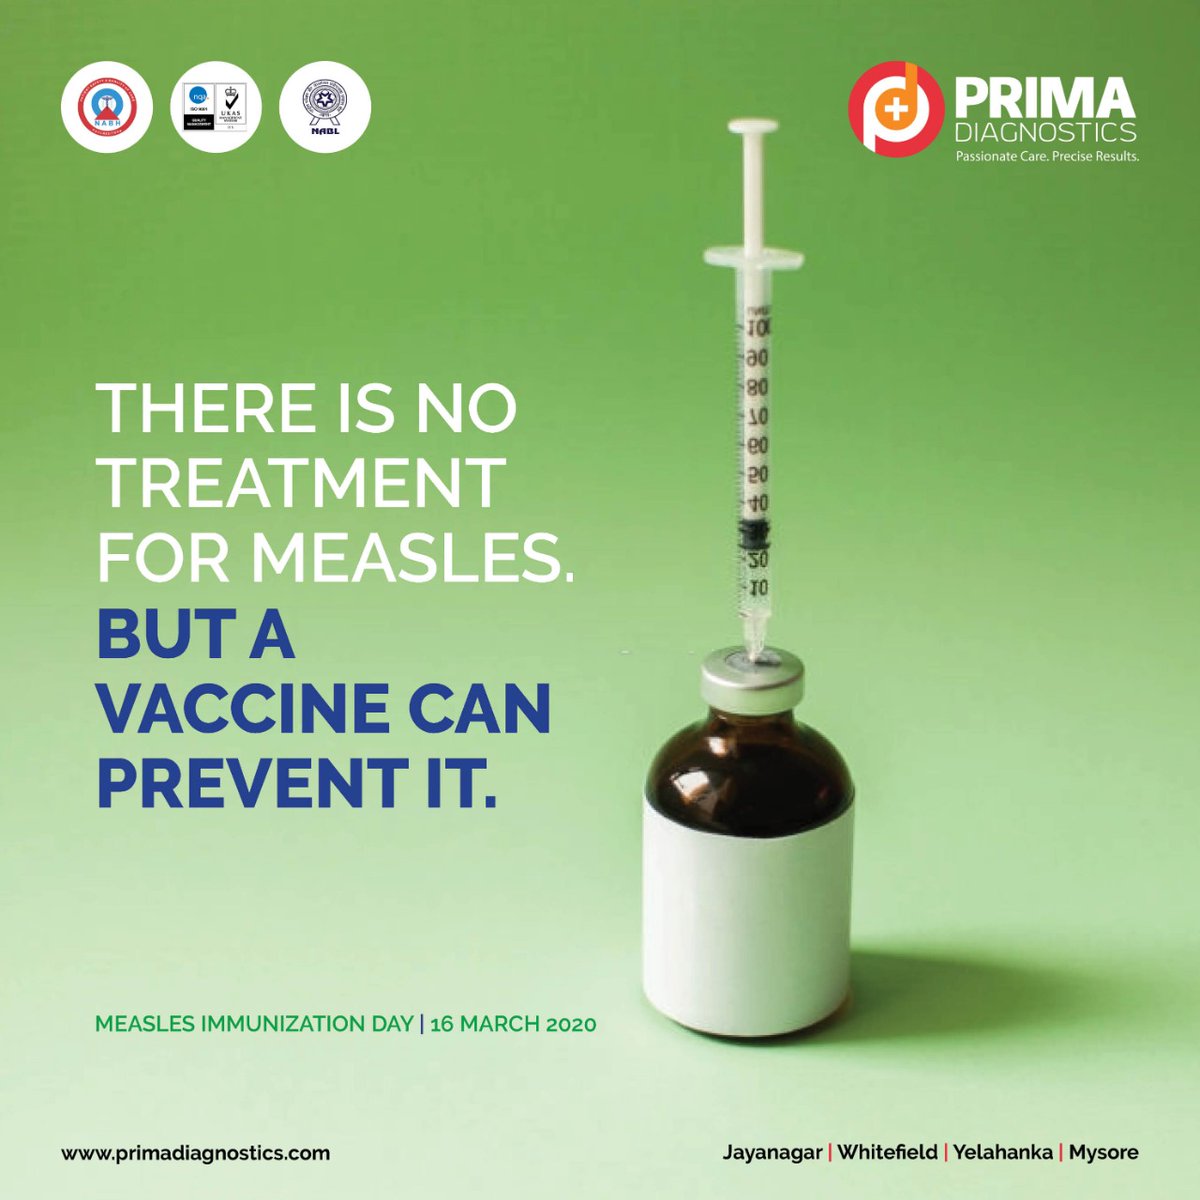 Children who don't receive measles immunization are at a high risk of fatal health complications. This #MeaslesImmunizationDay, get your child vaccinated today.

#PrimaDiagnostics #Bengaluru